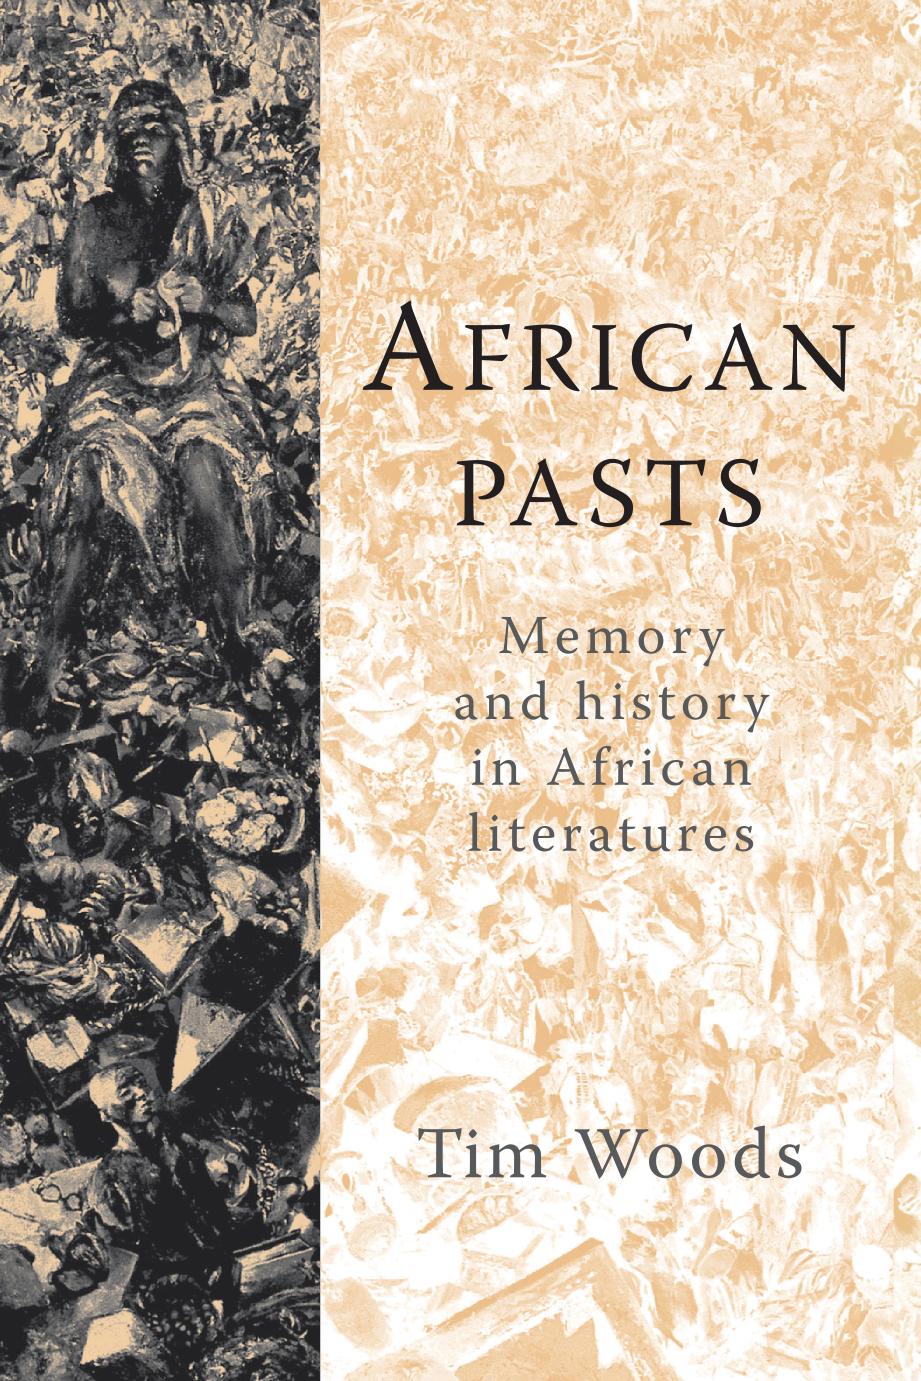 African pasts: Memory and history in African literatures